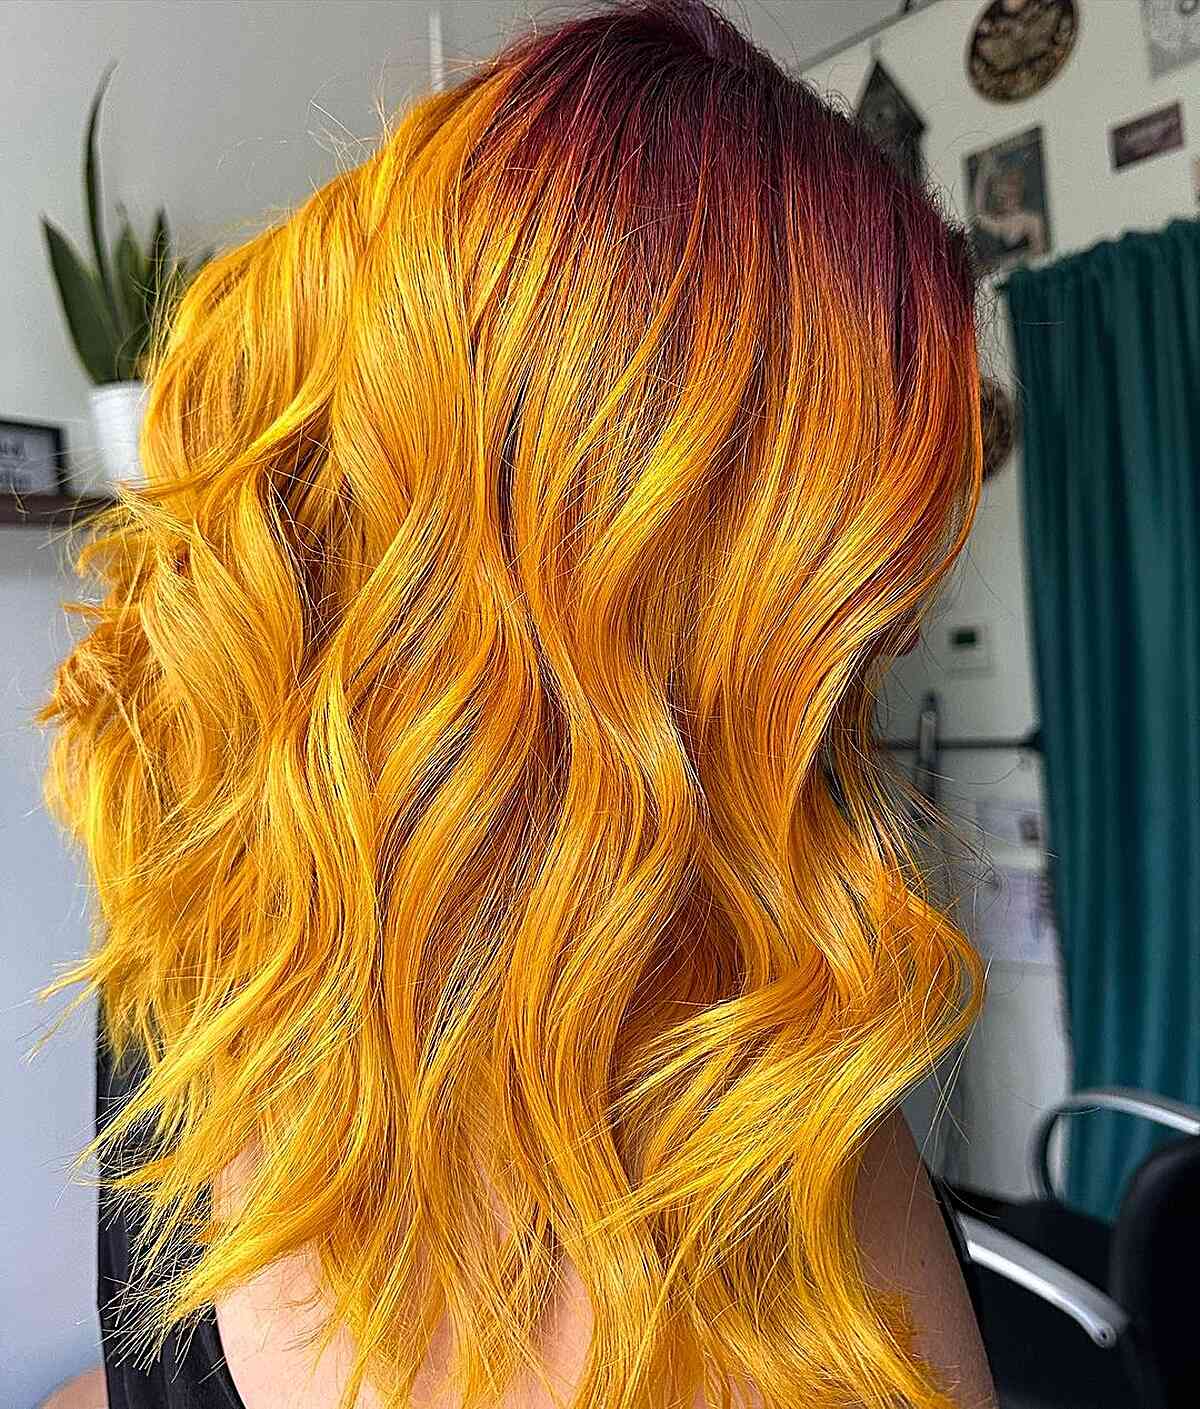 Wavy tresses in yellow hair color